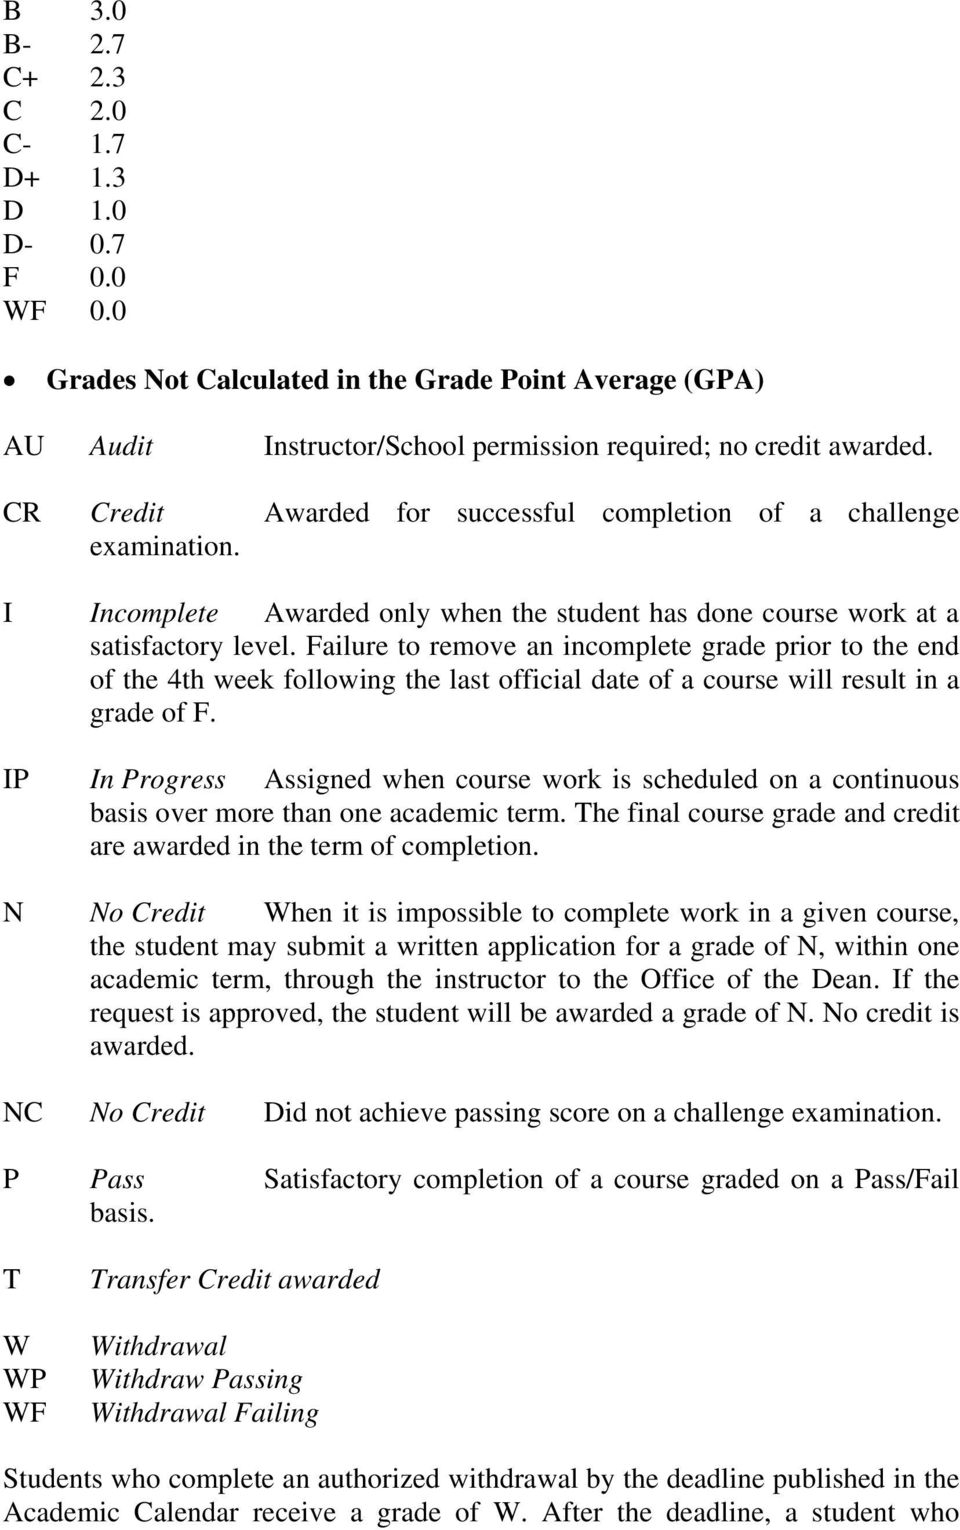 Failure to remove an incomplete grade prior to the end of the 4th week following the last official date of a course will result in a grade of F.